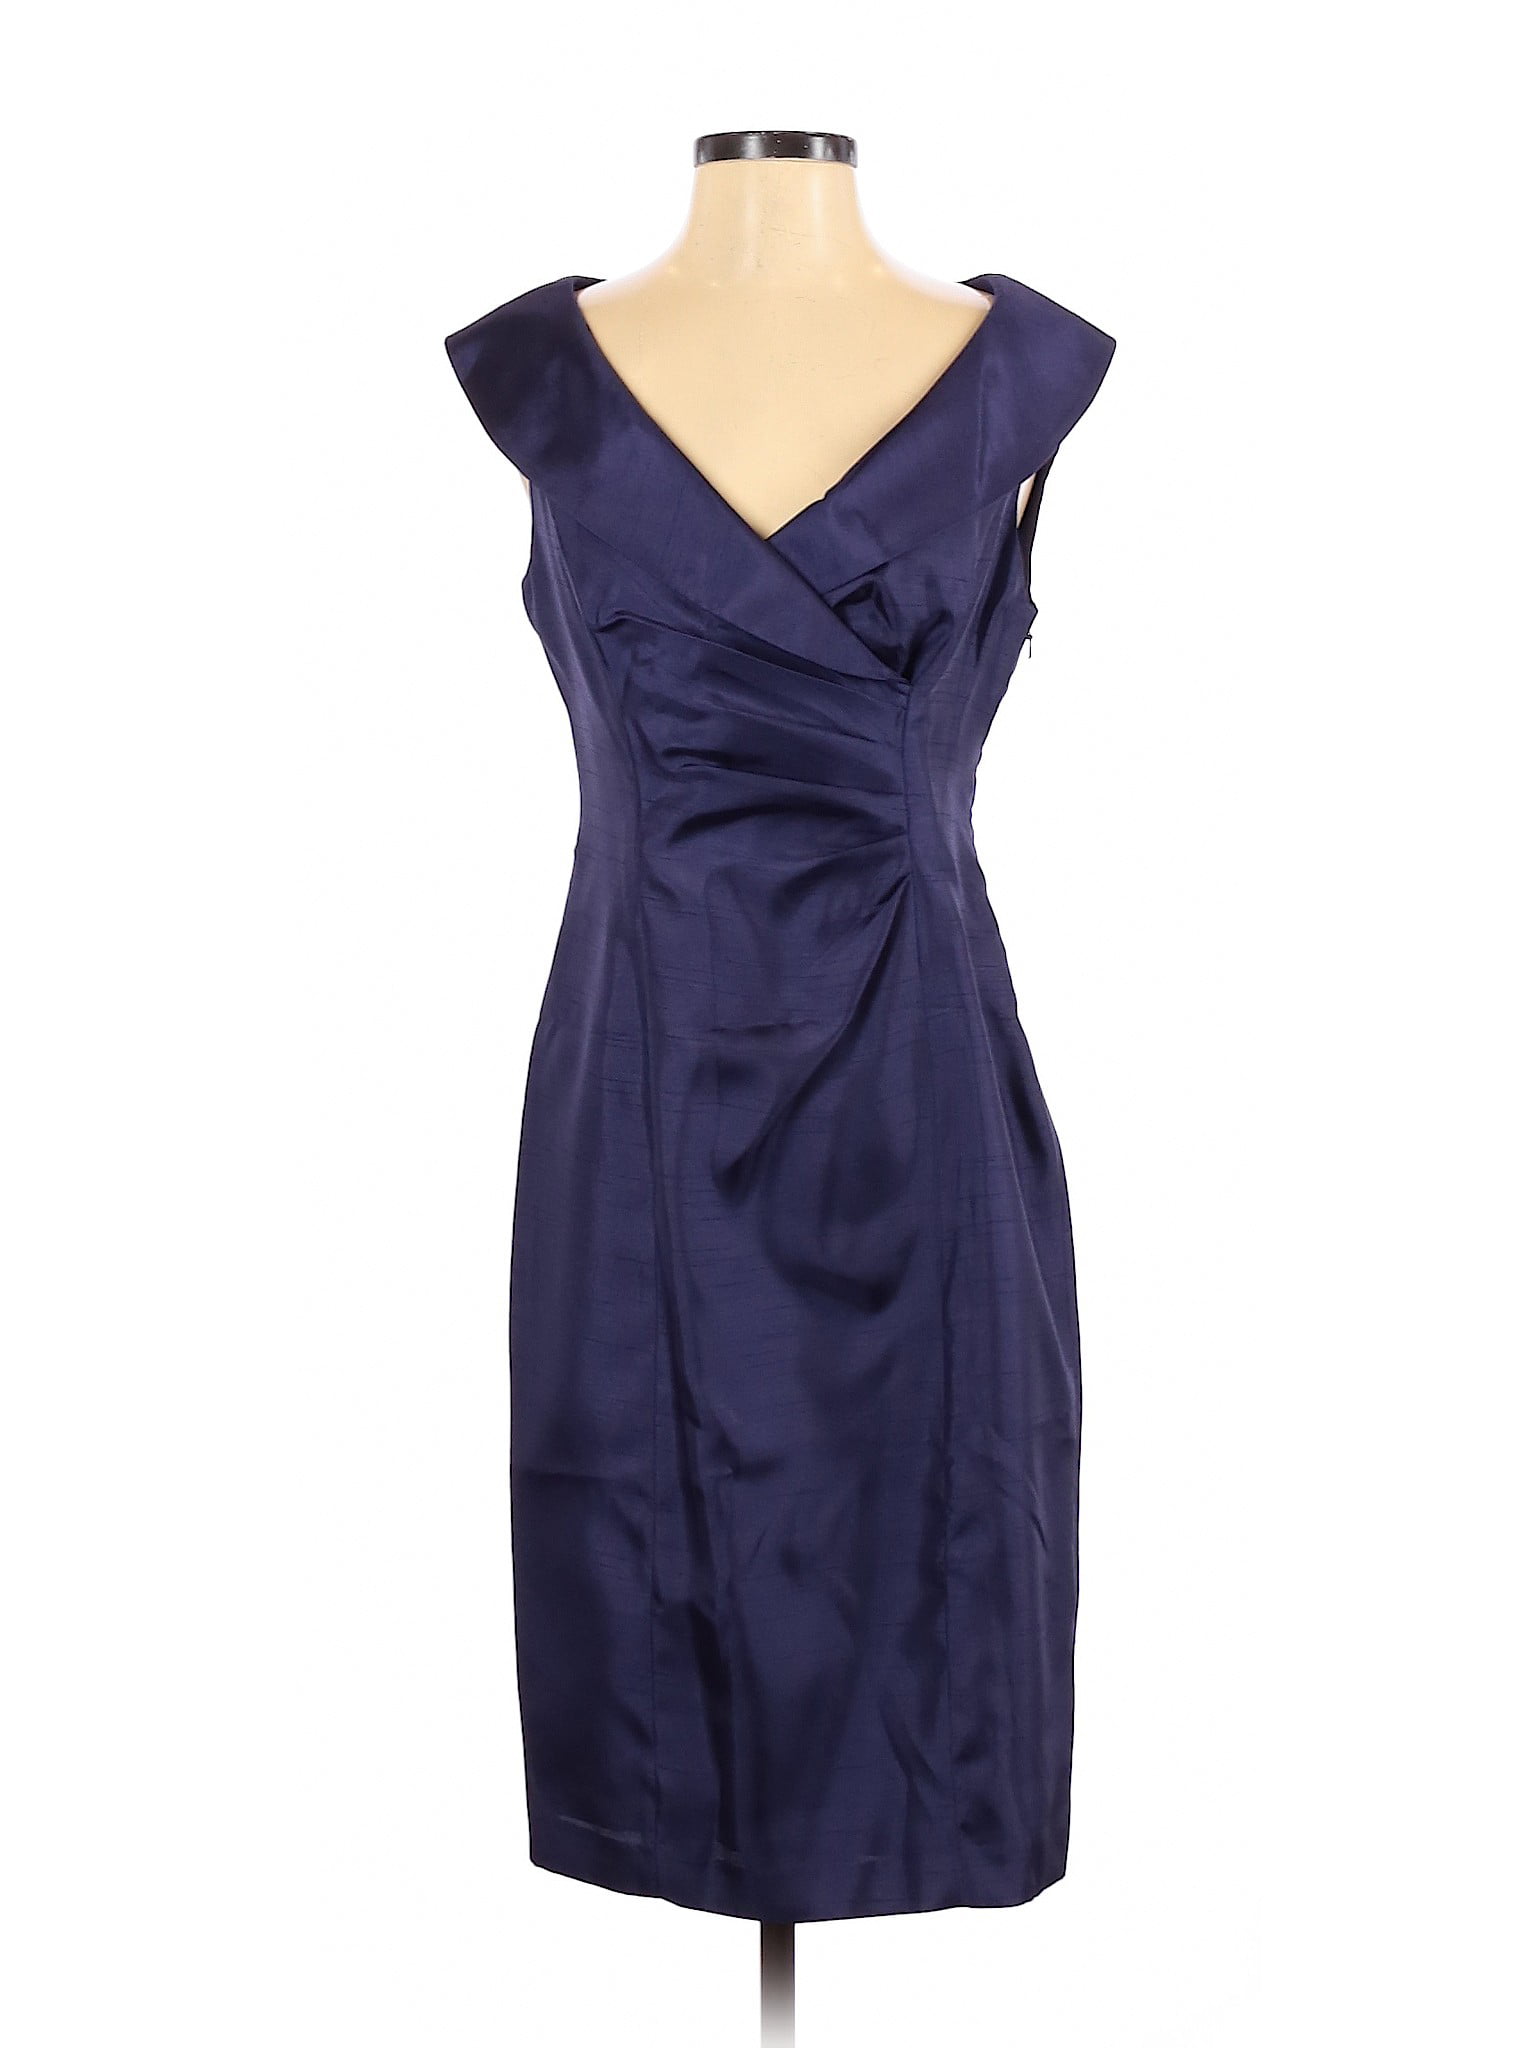 Evan Picone - Pre-Owned Evan Picone Women's Size 6 Cocktail Dress ...